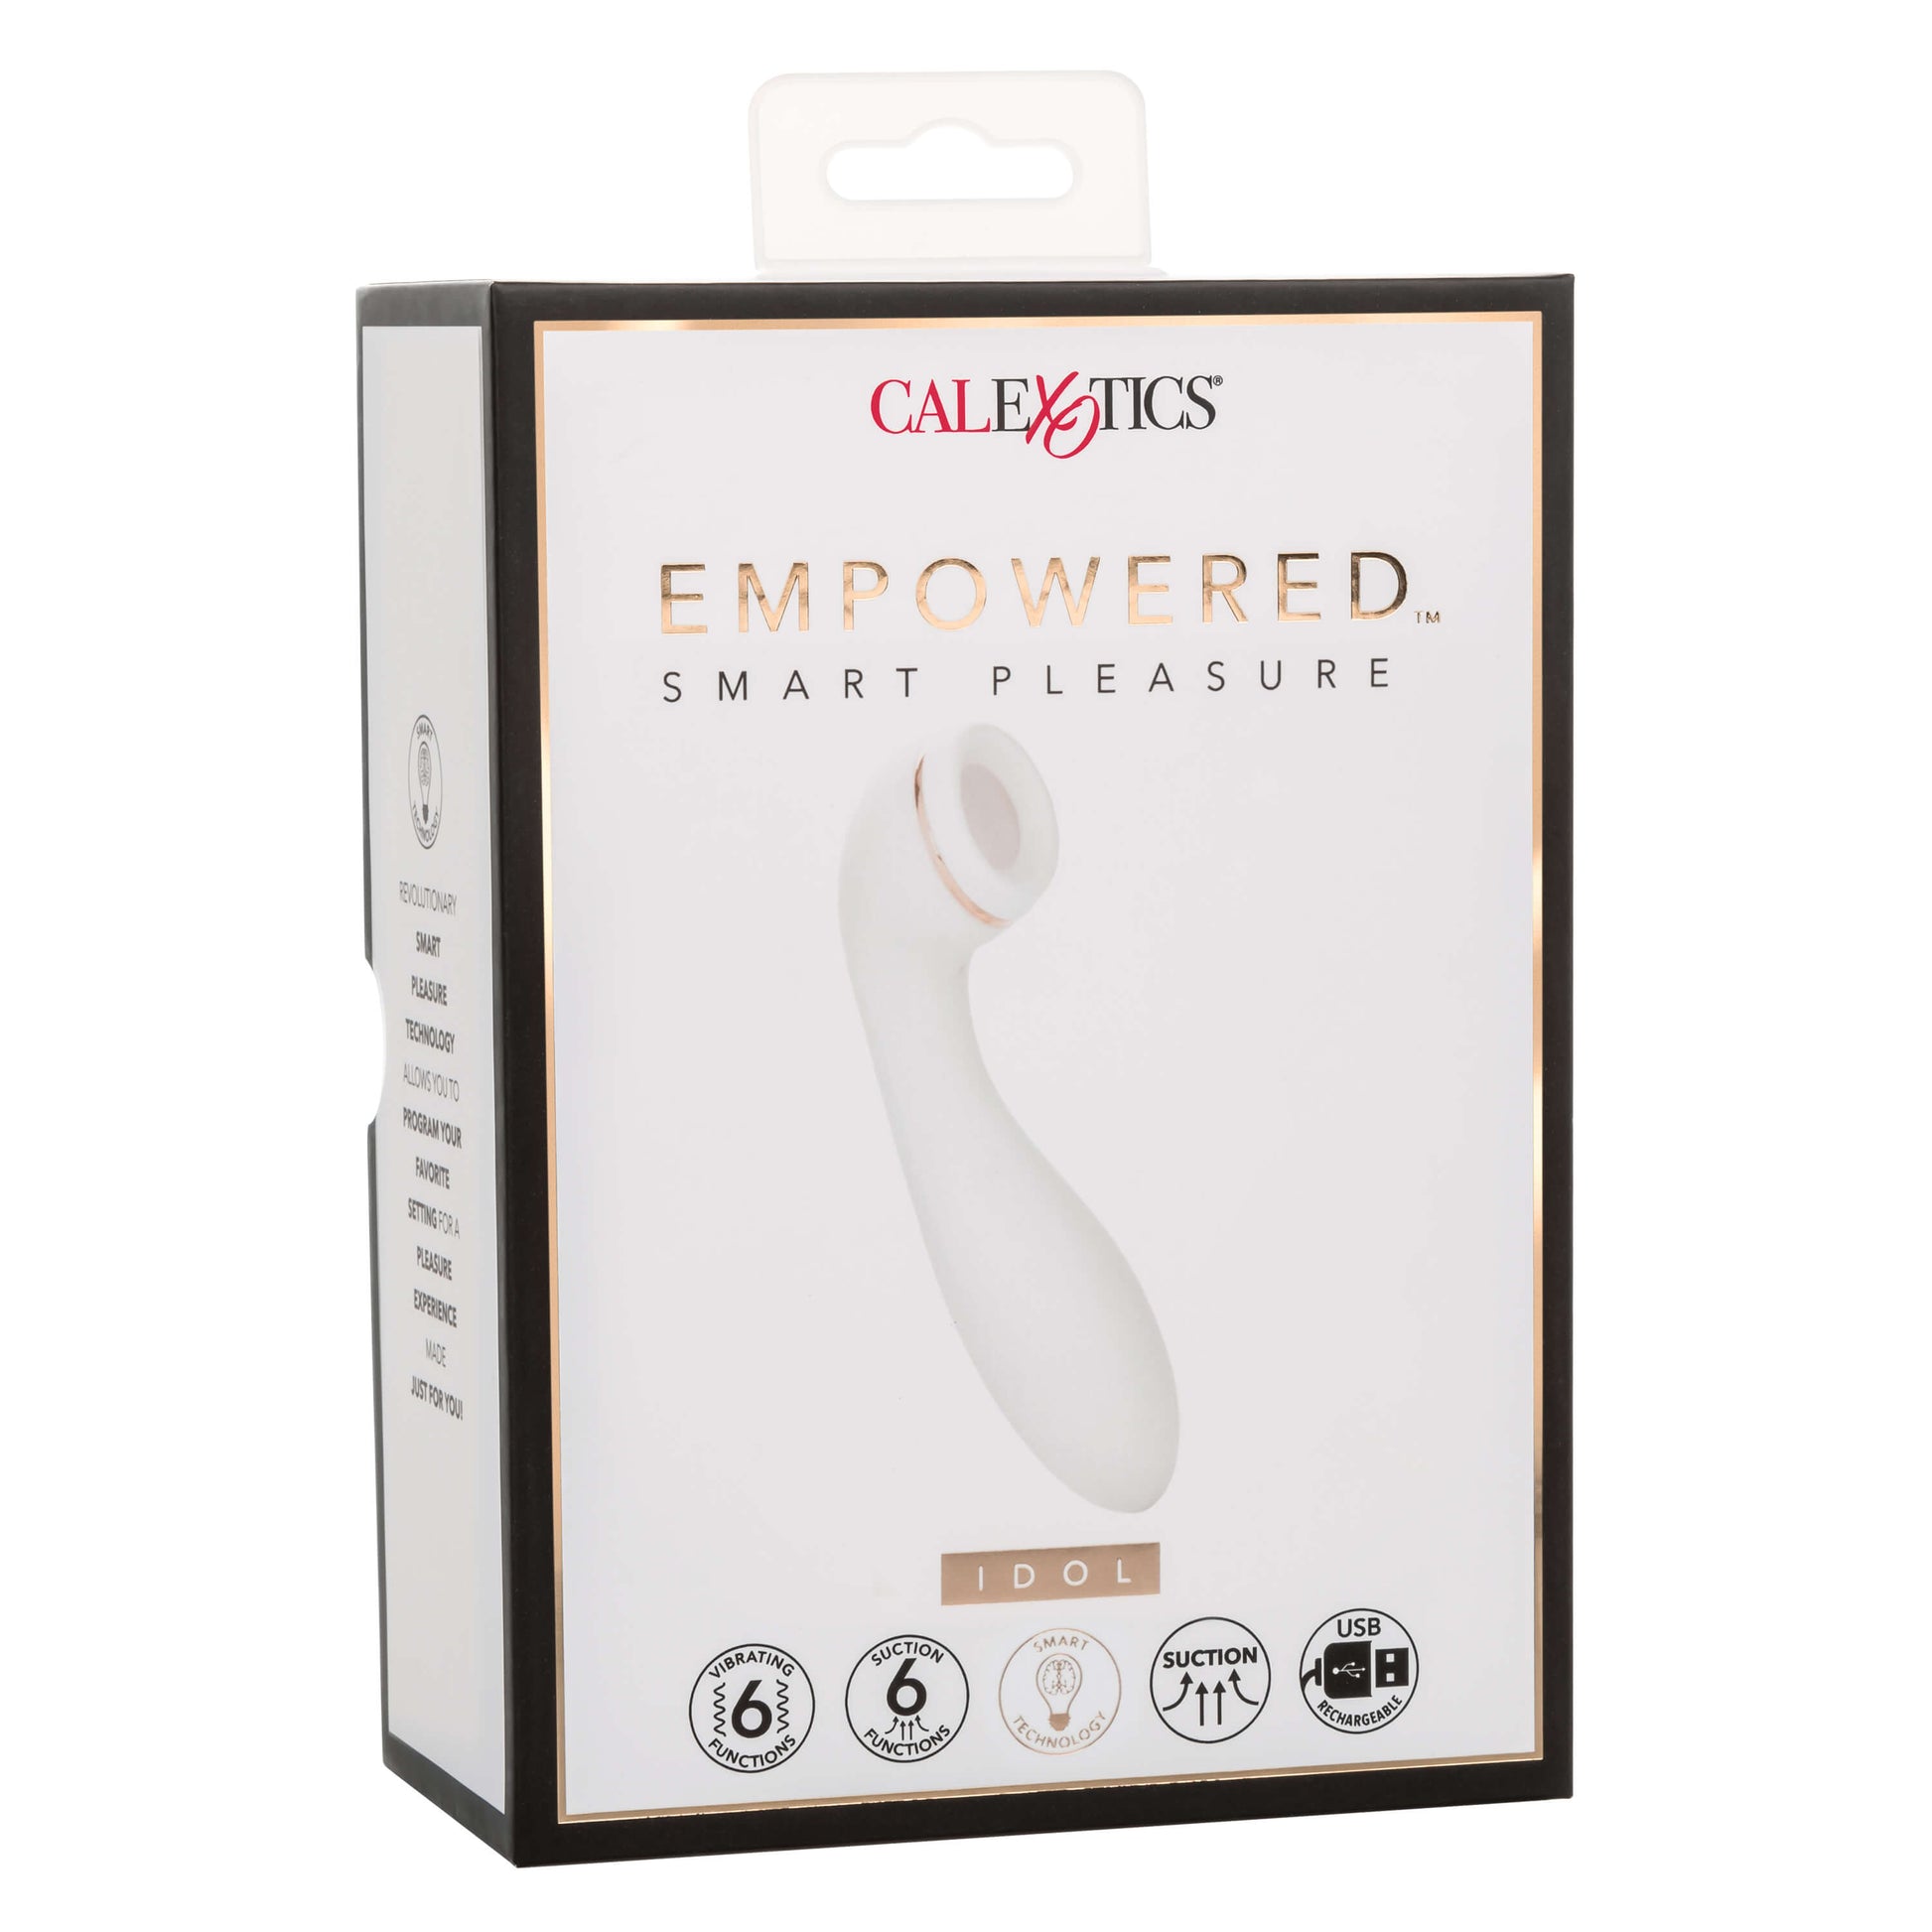 Package of the Empowered Smart Pleasure Idol - CalExotics - The Bigger O online sex toy shop USA, Canada & UK shipping available